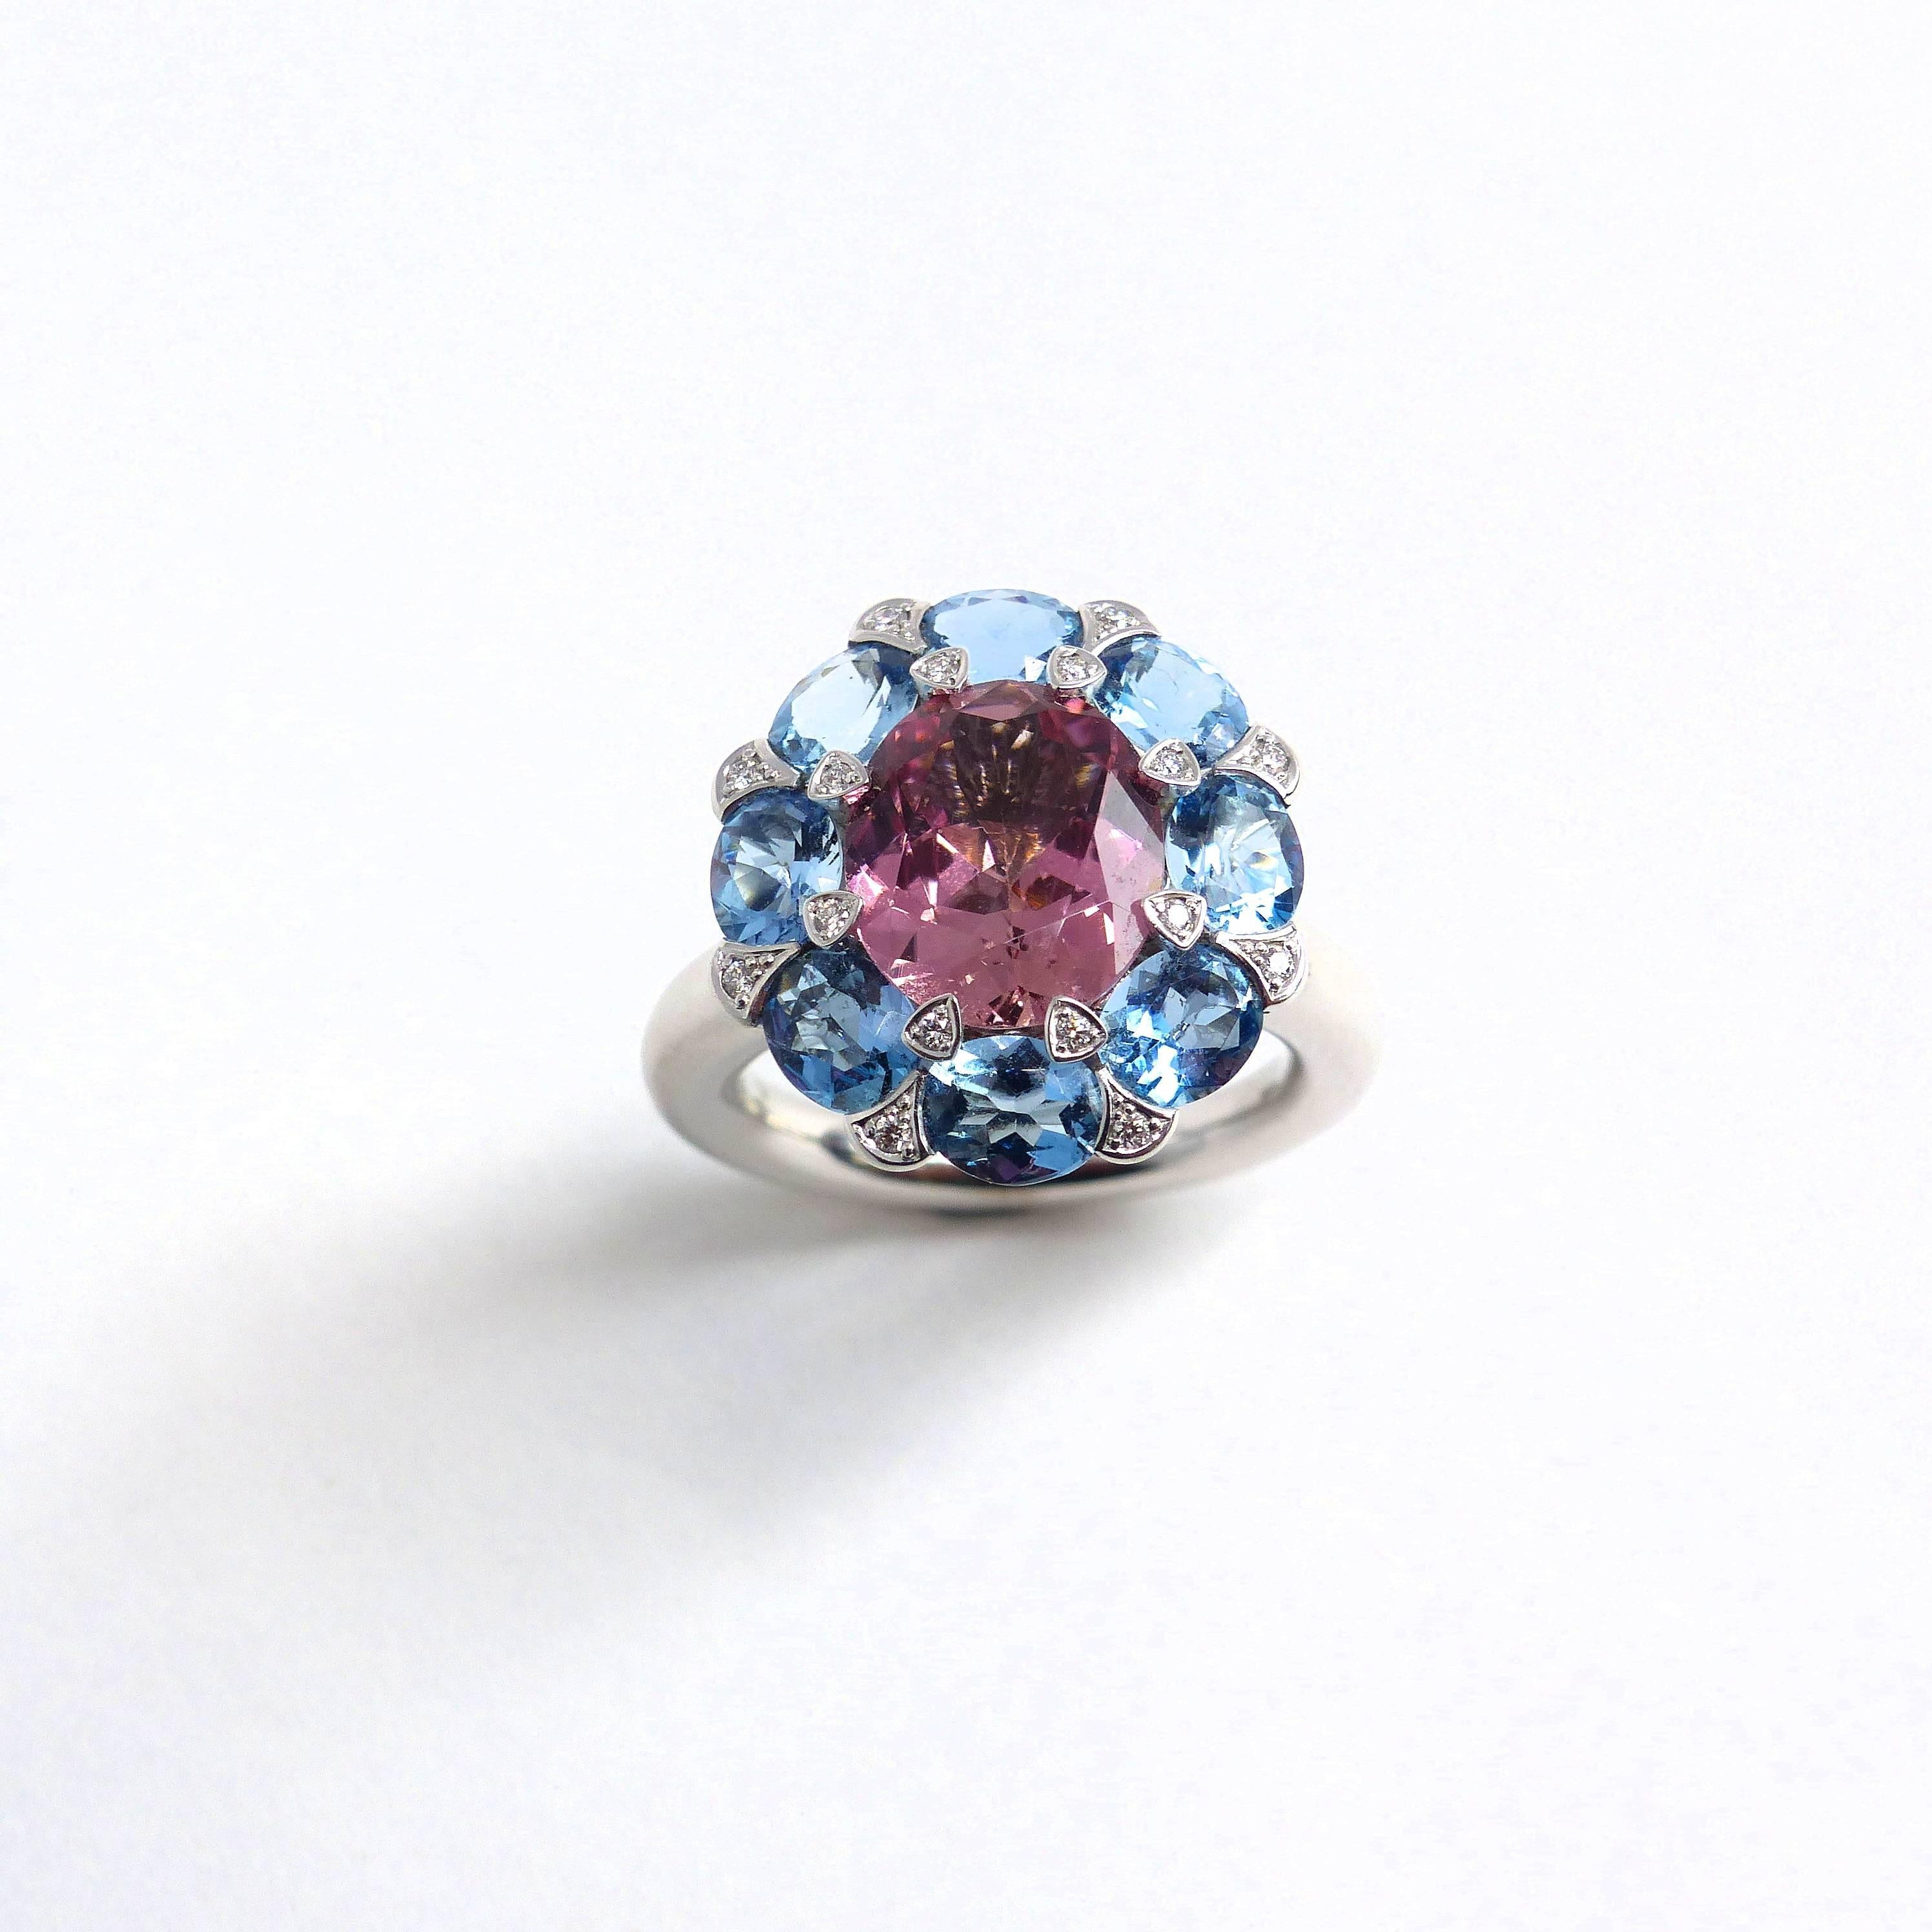 Retro Ring in White Gold with 1 Pink Tourmaline and 8 Aquamarines and Diamonds. For Sale